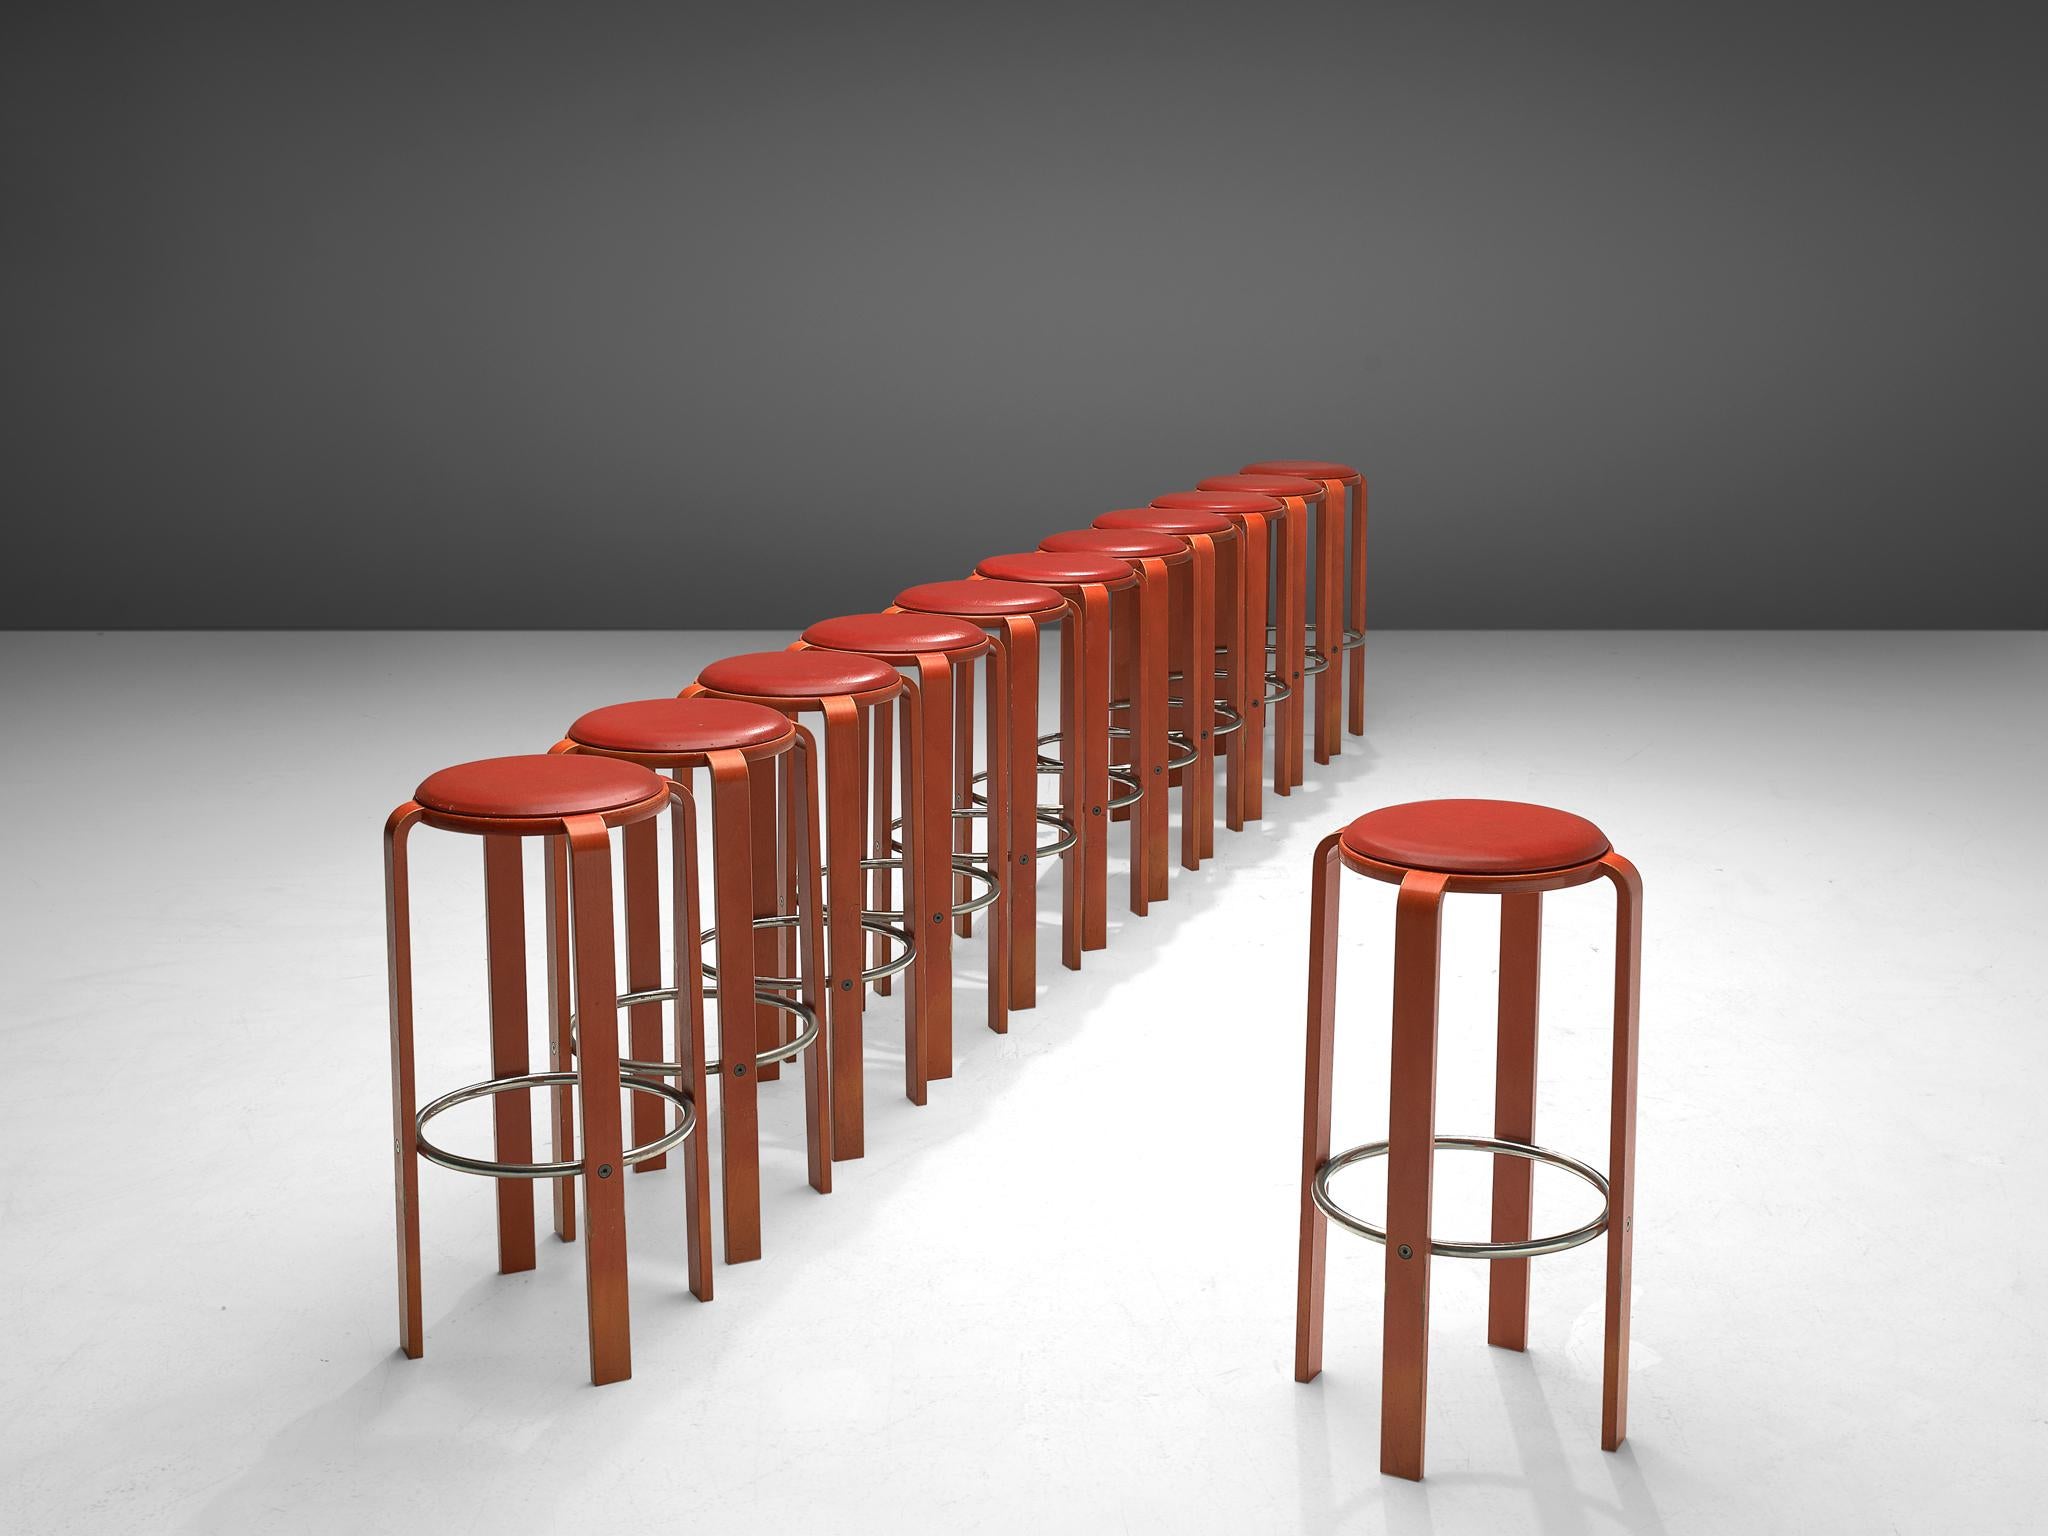 Bruno Rey for Dietiker, large set of barstools, plywood, aluminum and leather, Switzerland, 1970s

Large set of Modernist barstools by Bruno Rey and produced by Dietiker. The stools are made of red lacquered wood and the padded seat is finished